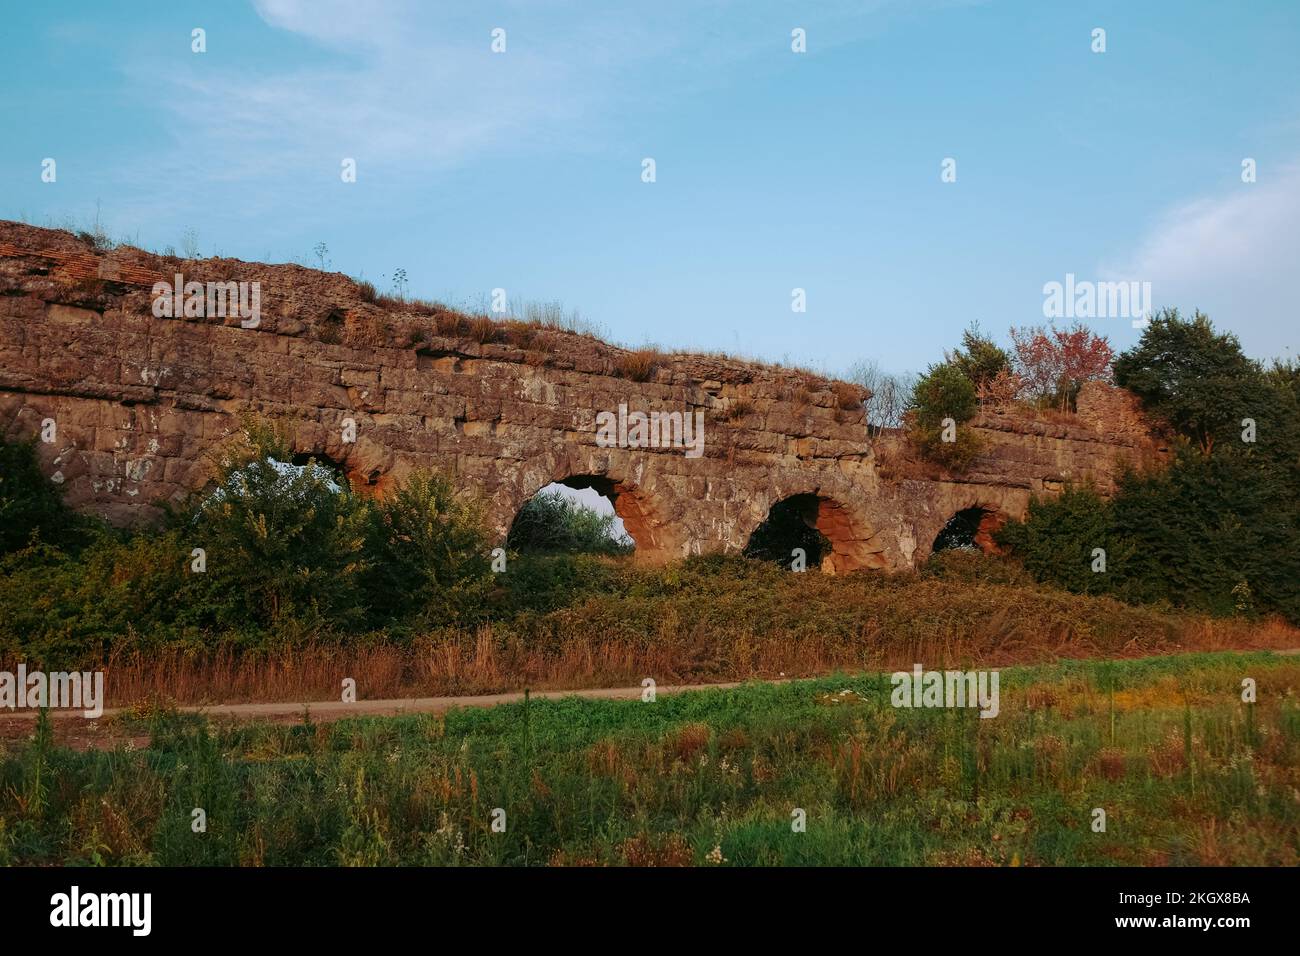 Ancient aqueducts at Parco Degli Acquedotti. Stone arches built to carry water into the city during the Roman Empire. Outdoor park in Rome, Italy. Stock Photo